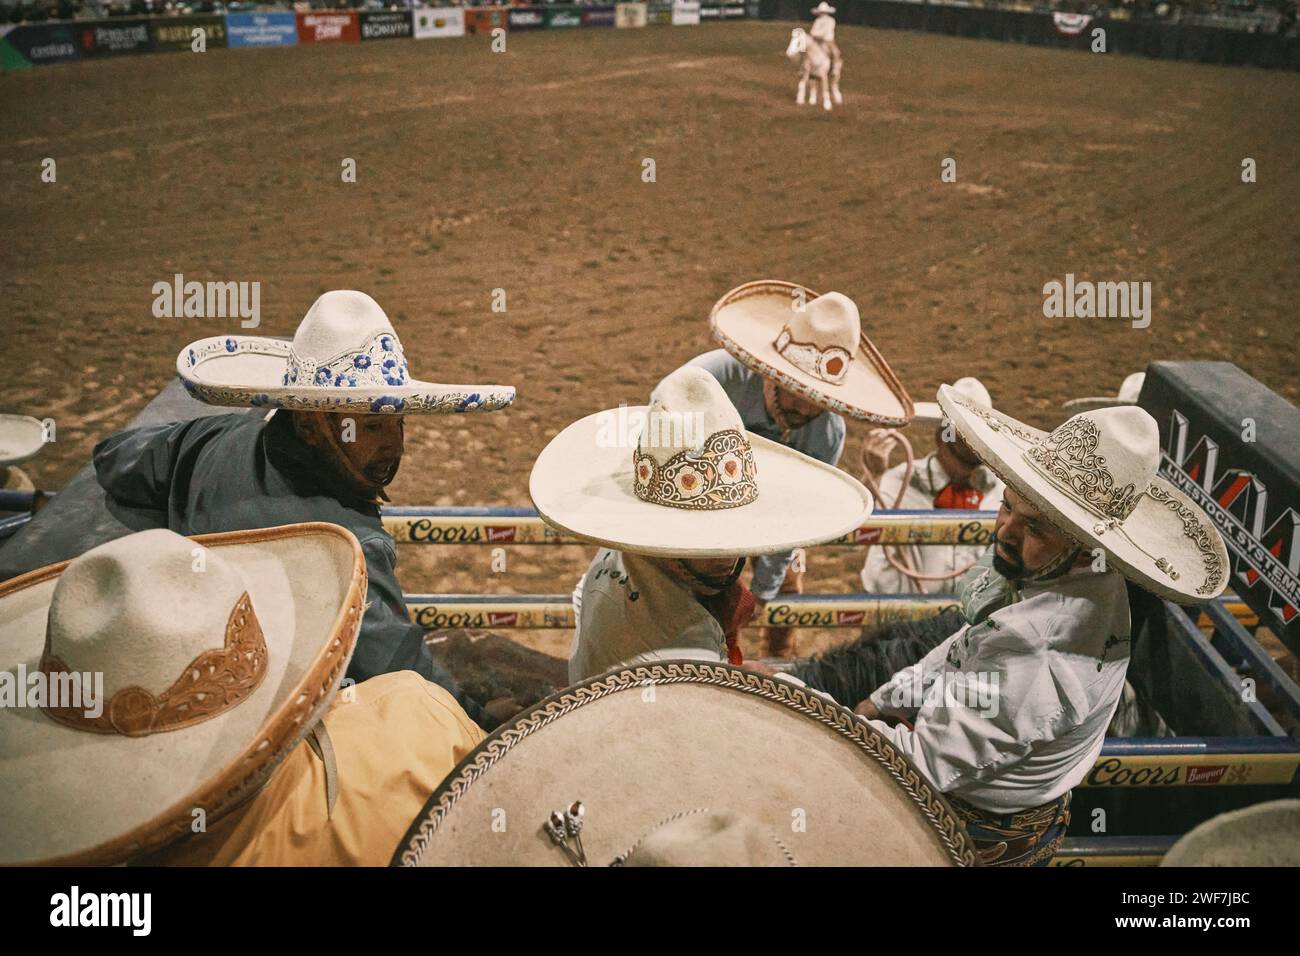 Mexican cowboys in bullpen during rodeo Stock Photo